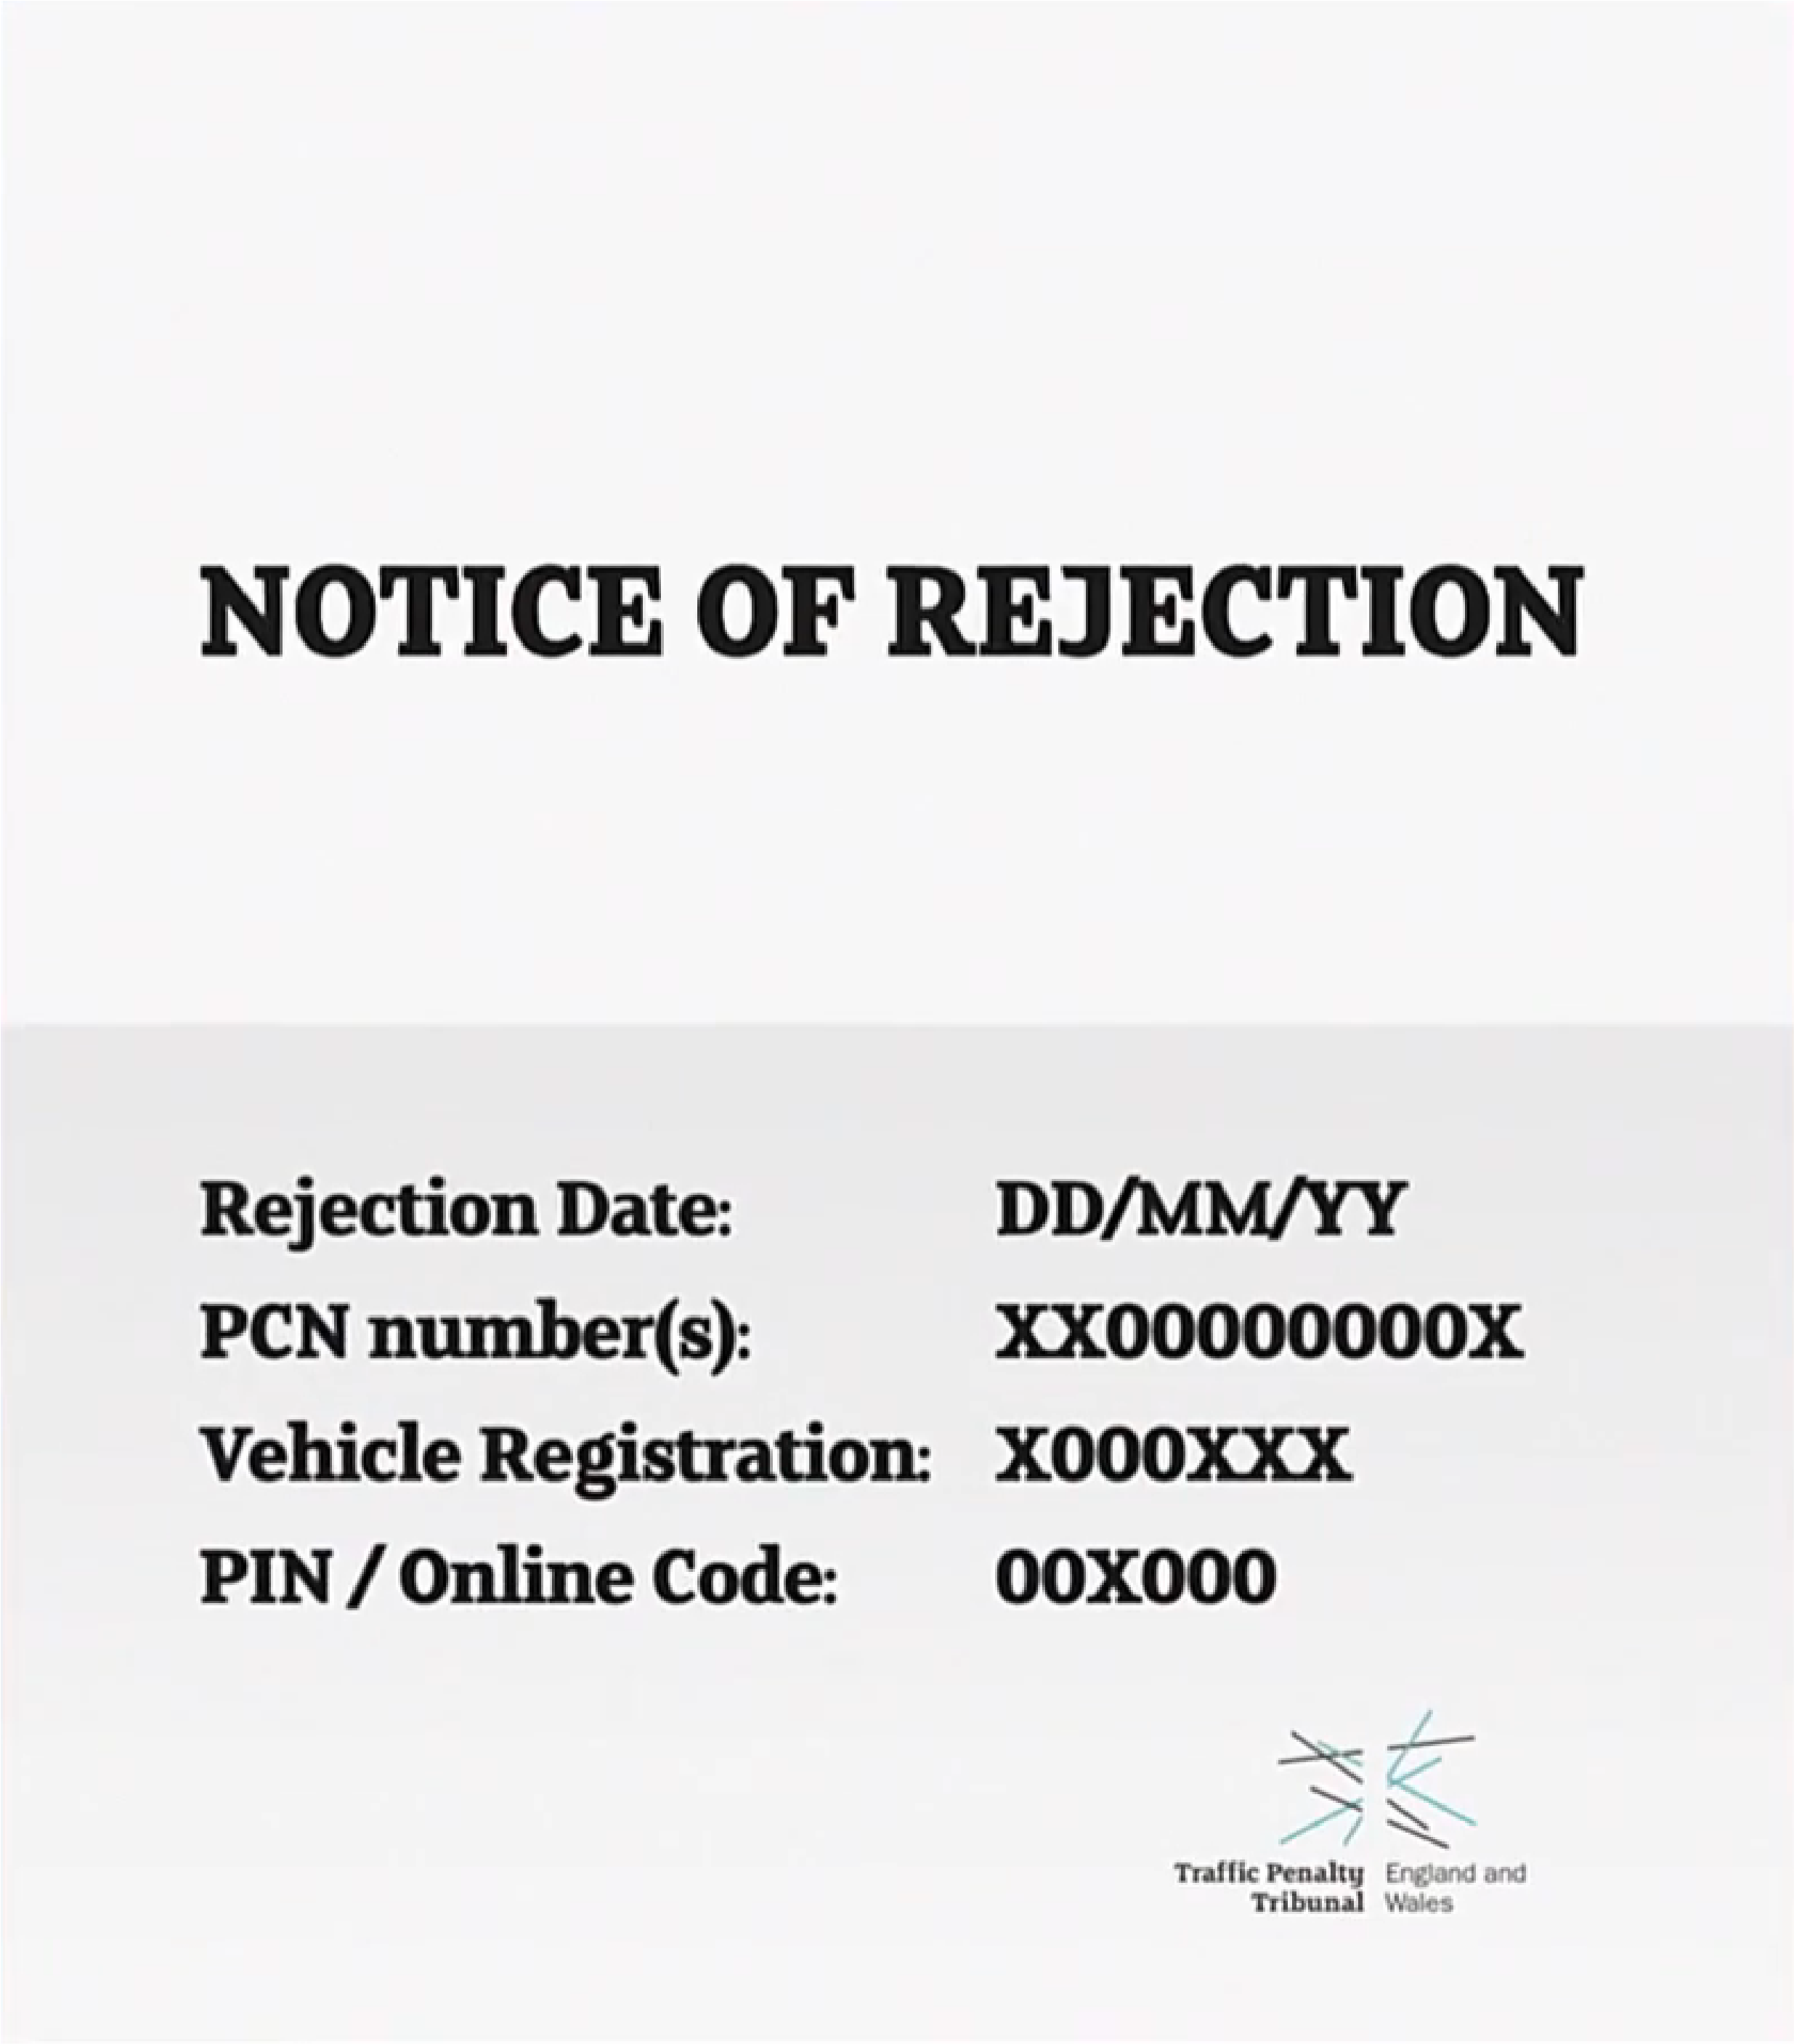 Graphic mock-up of the information contained on a Notice of Rejection of Representations received from an authority